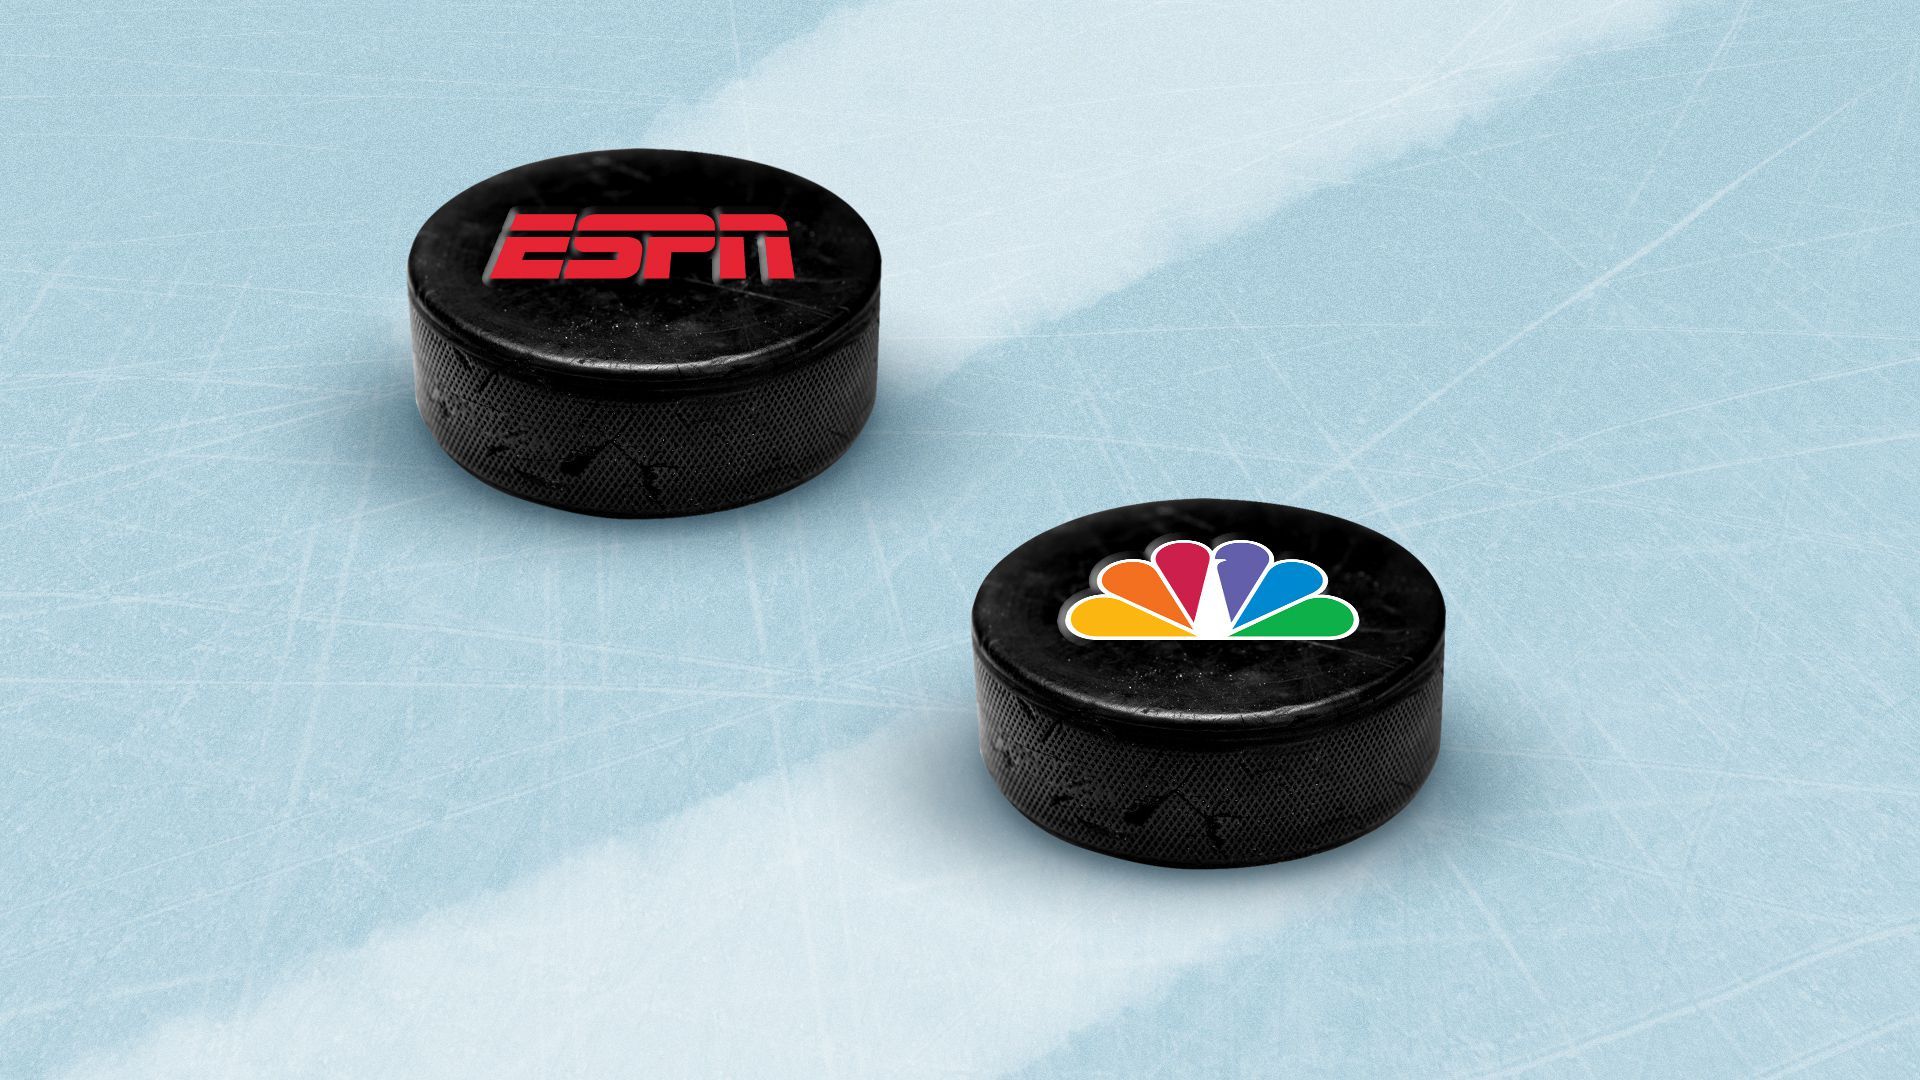 Illustration of two hockey pucks with the ESPN and NBC logos on them, sliding across the ice